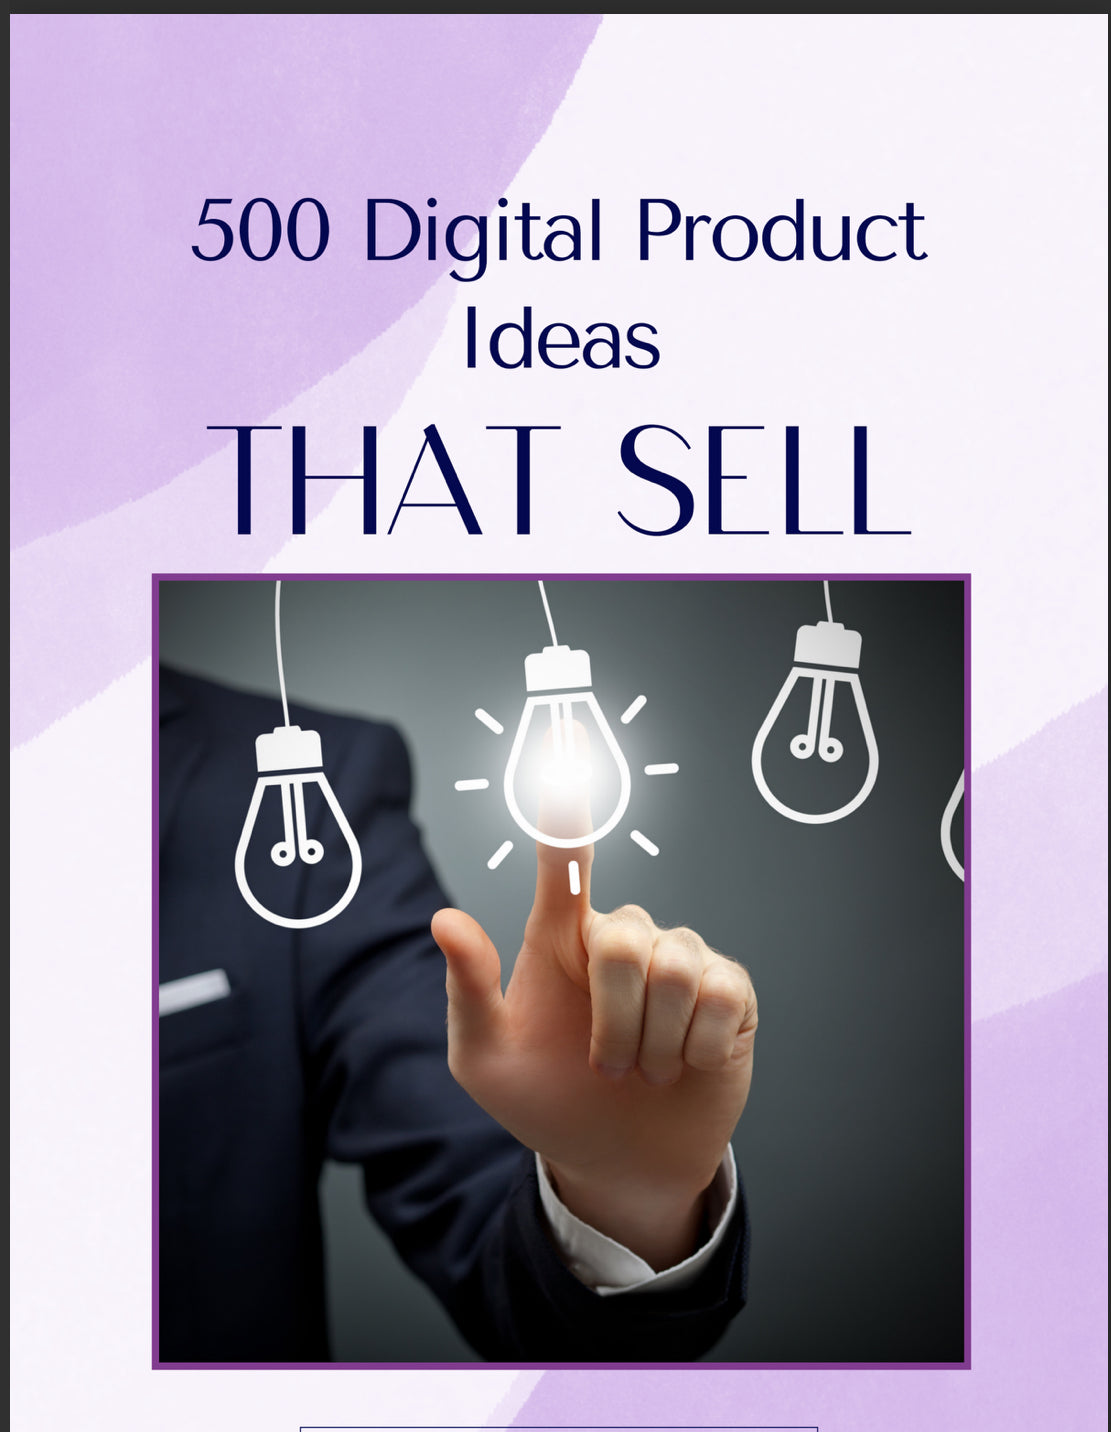 500 DIGITAL PRODUCTS IDEA THAT SELL